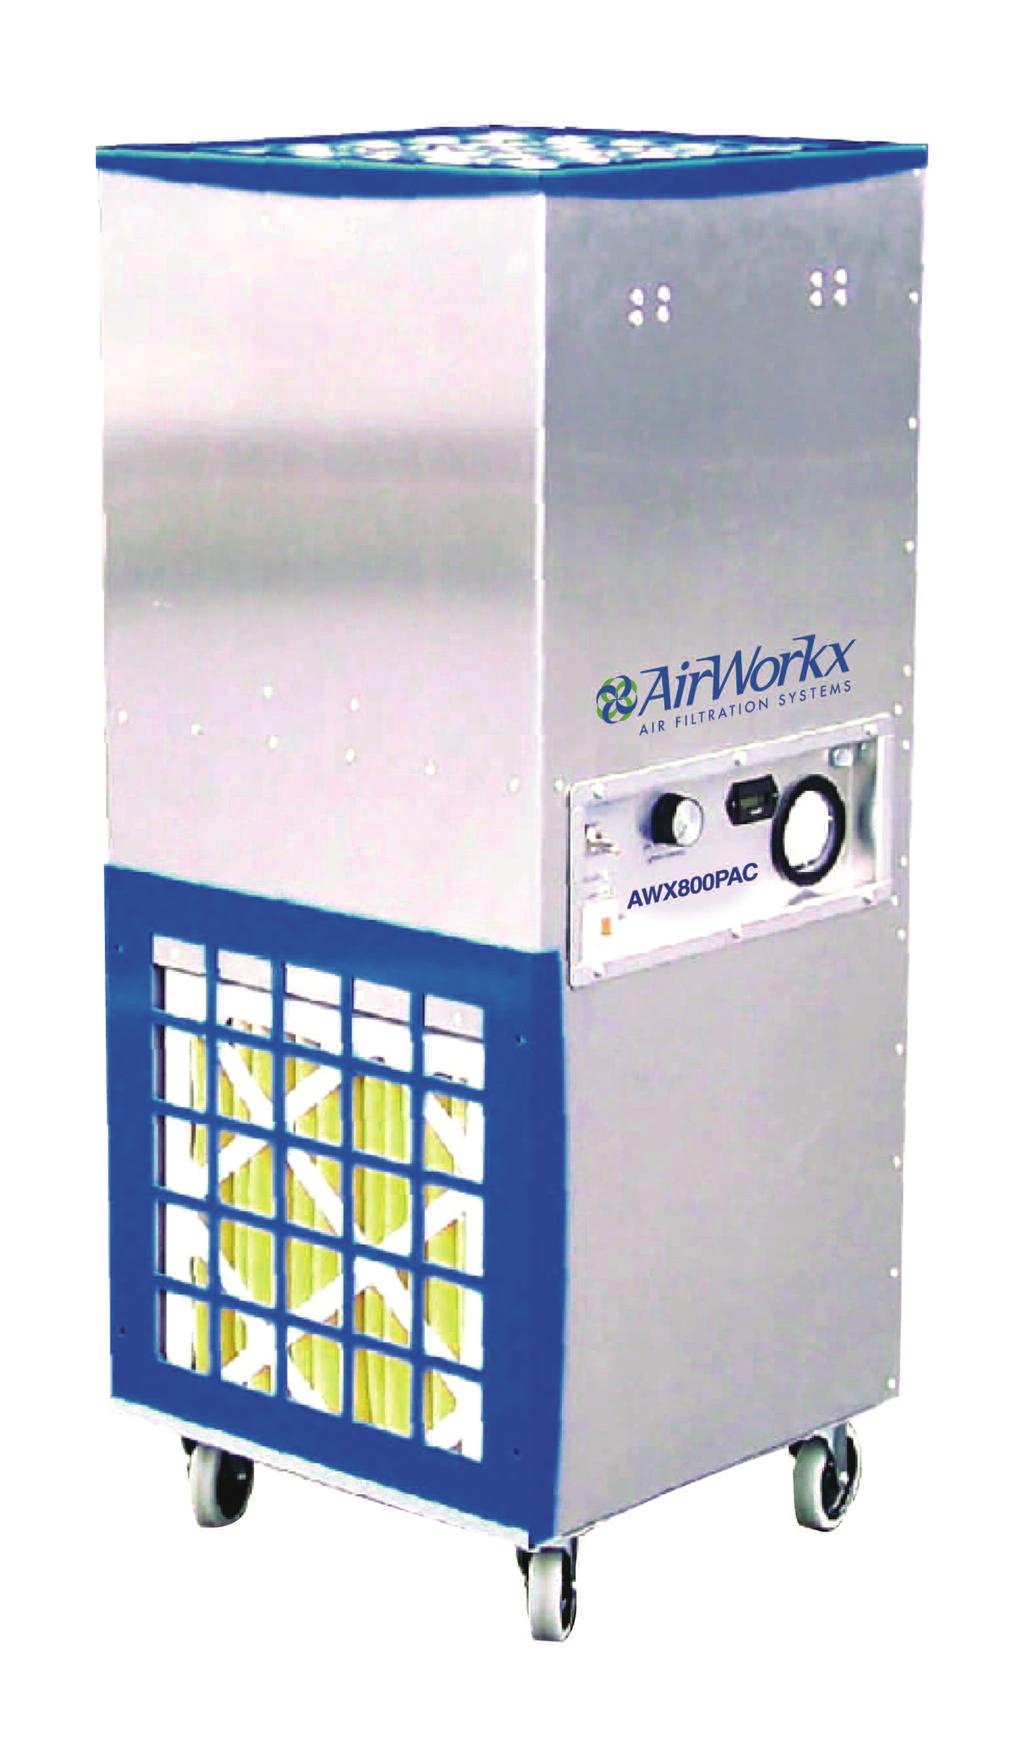 AWX800PAC Designed for use in hospital and other medical/ veterinary and laboratory environments for air purification and sterilization. Also used in morgues, mortuaries and archives.